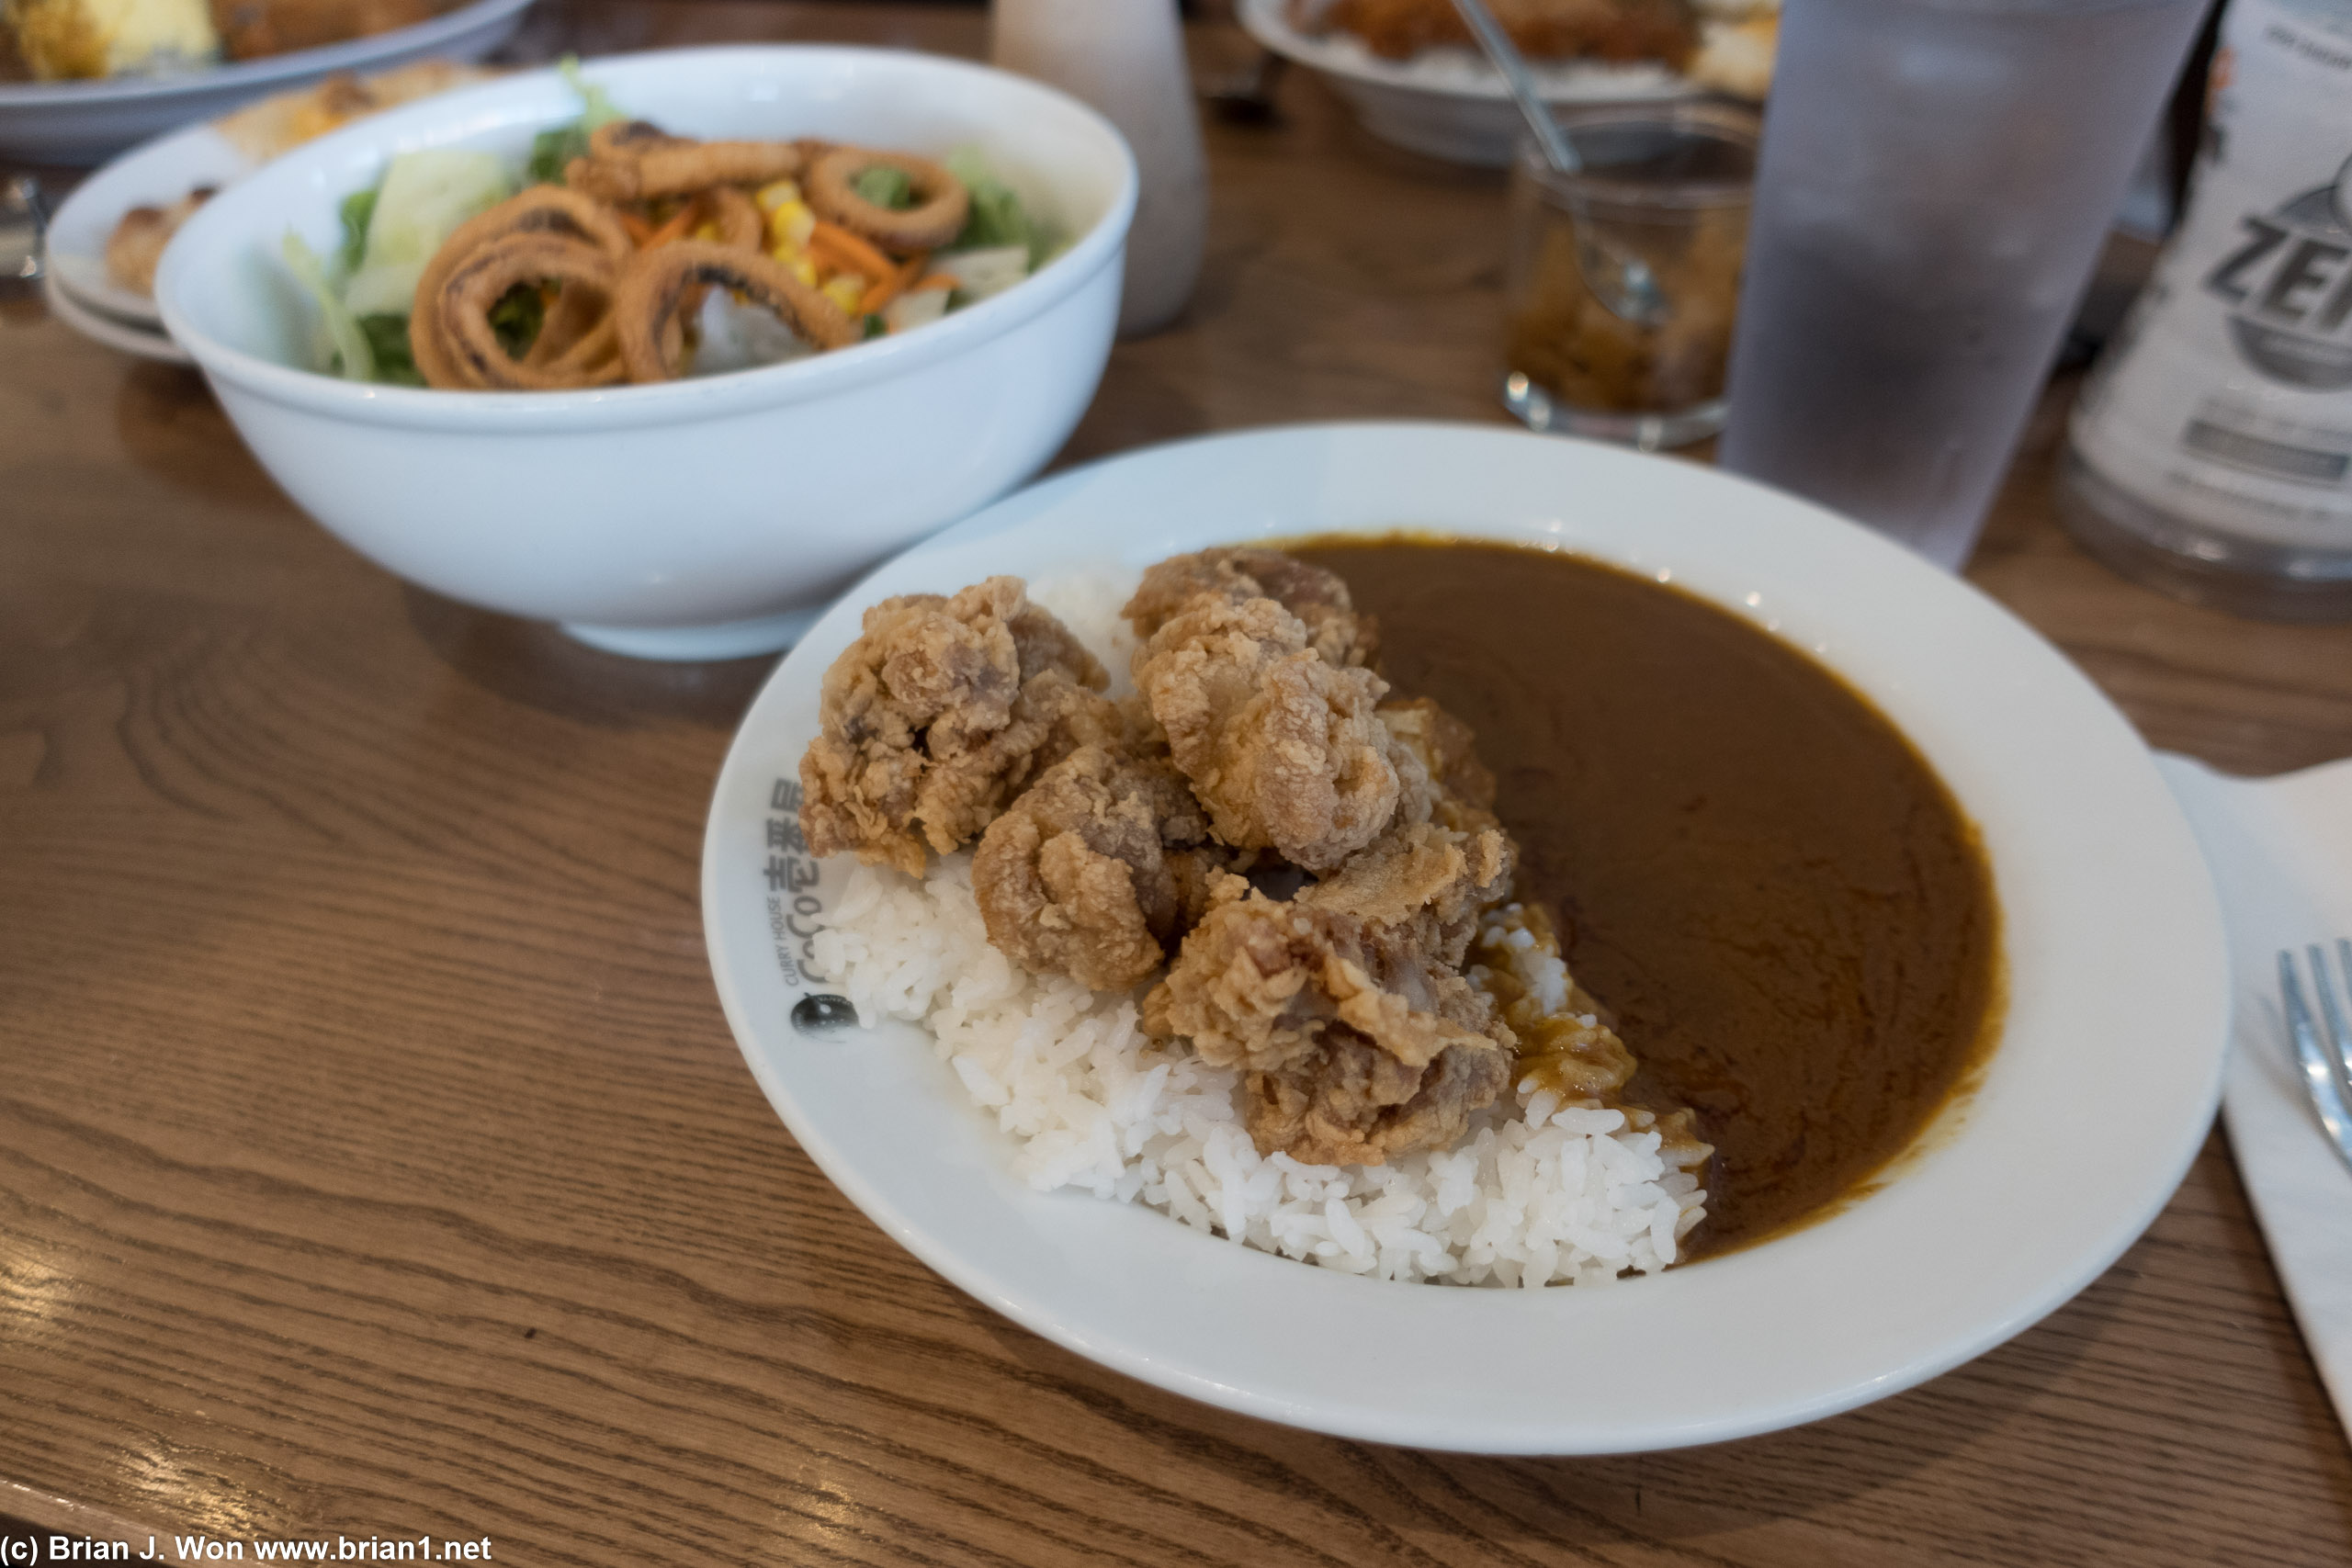 Fried chicken curry was okay.